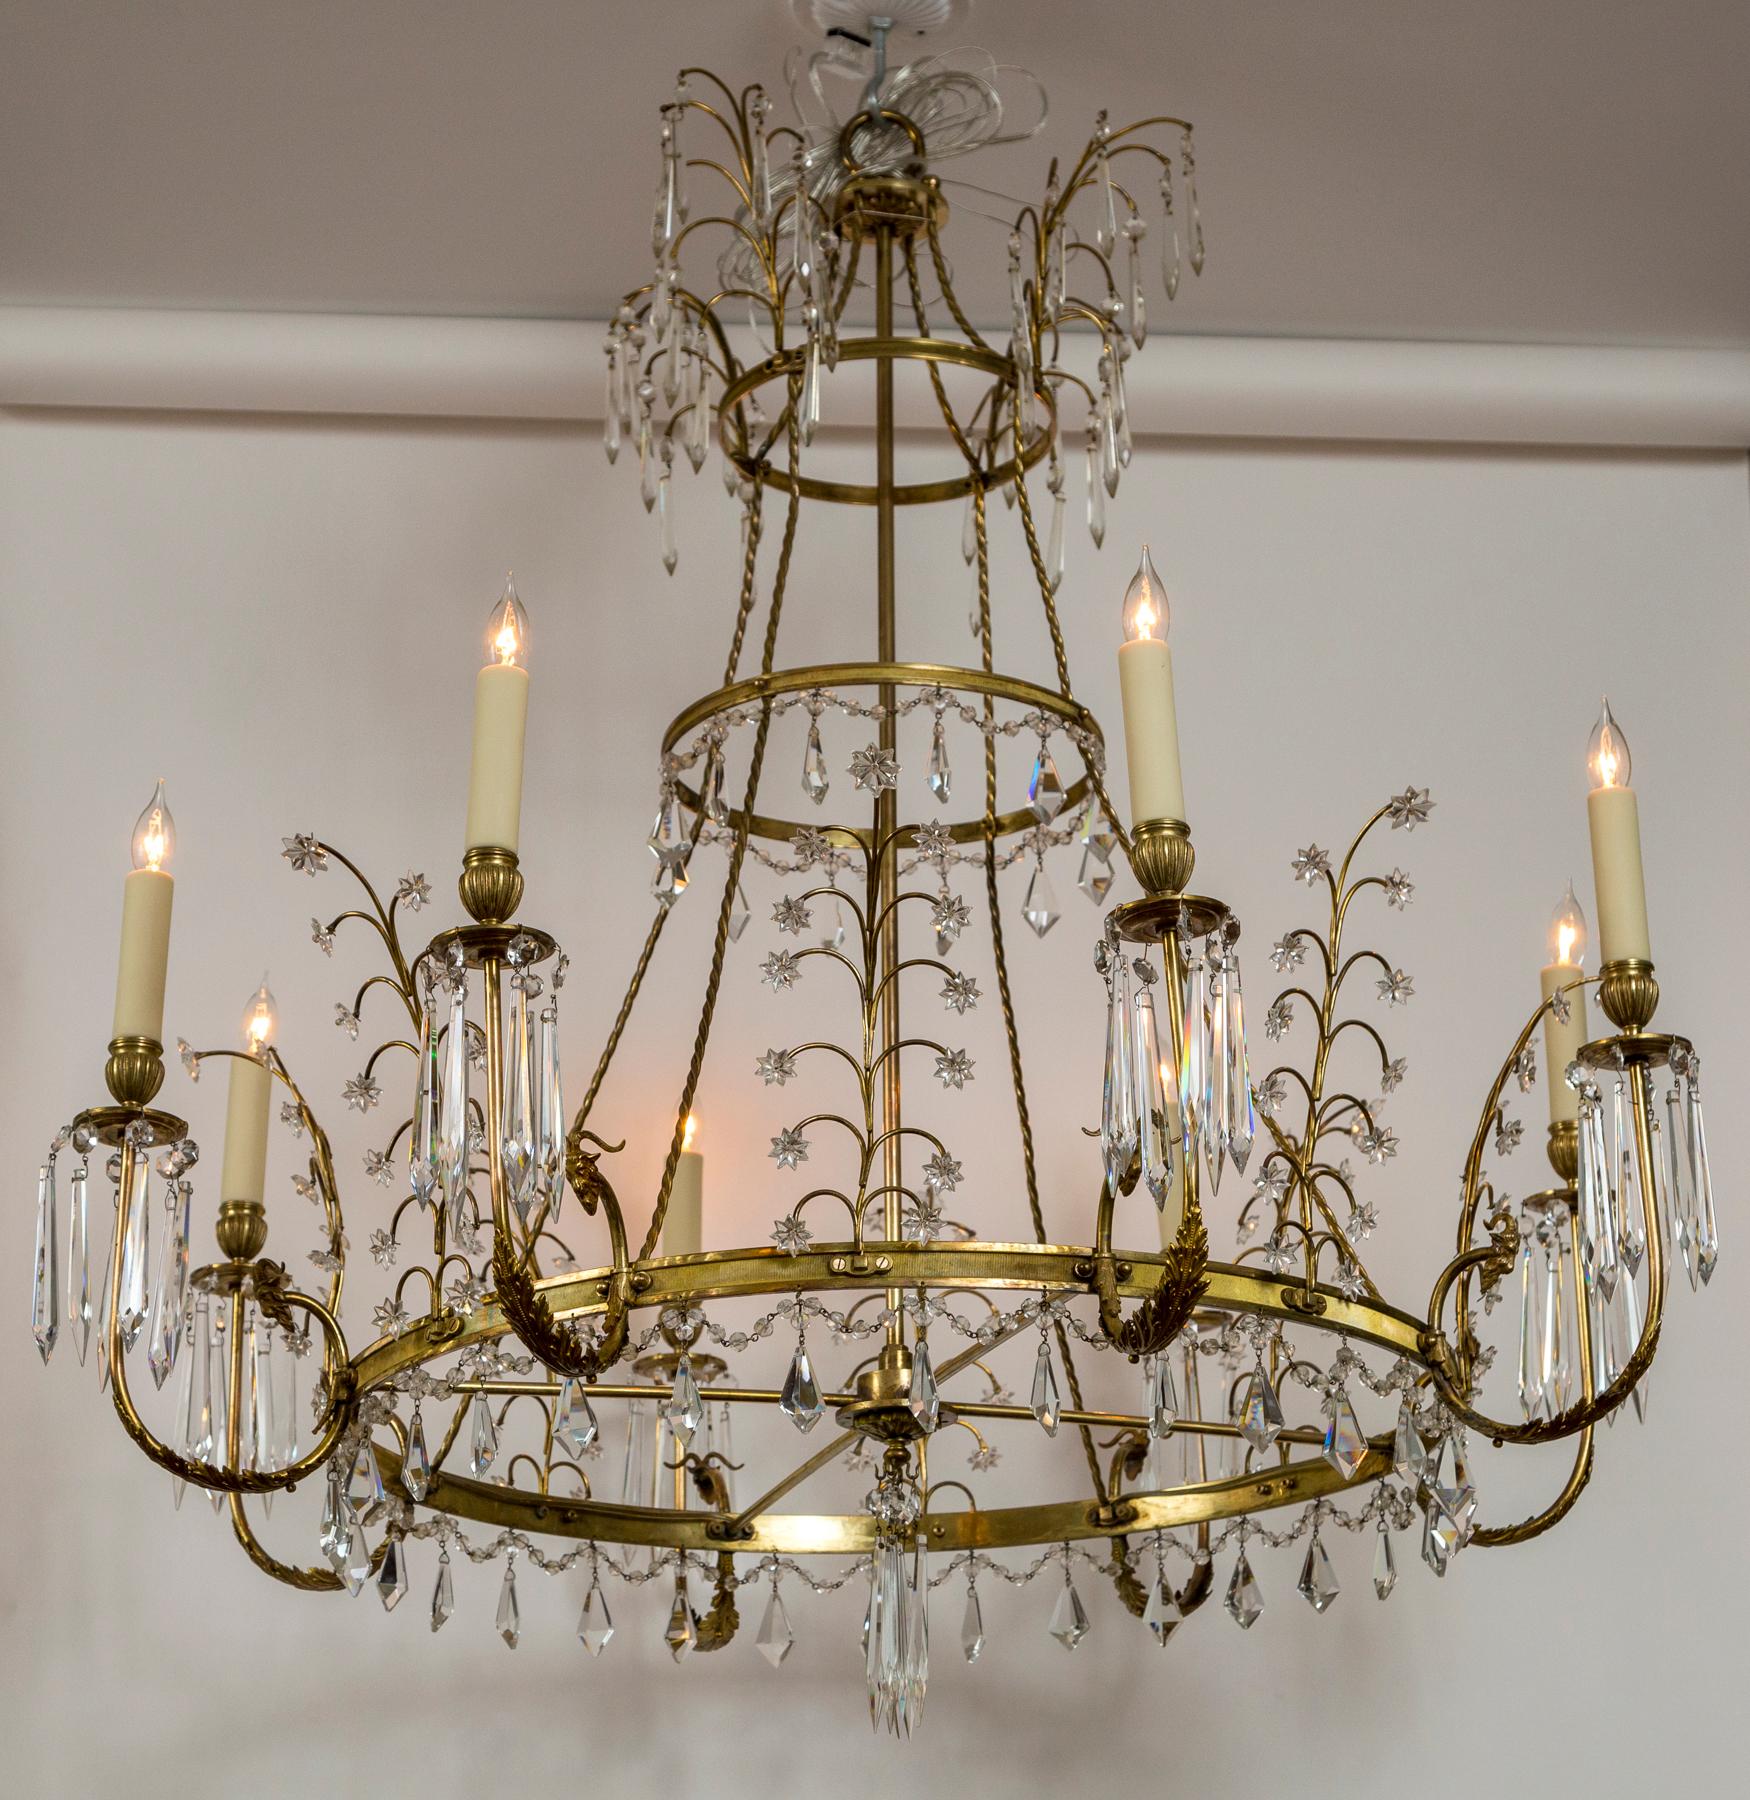 Early 20th Century Baltic Russian Neoclassical Brass and Crystal Chandelier For Sale 9